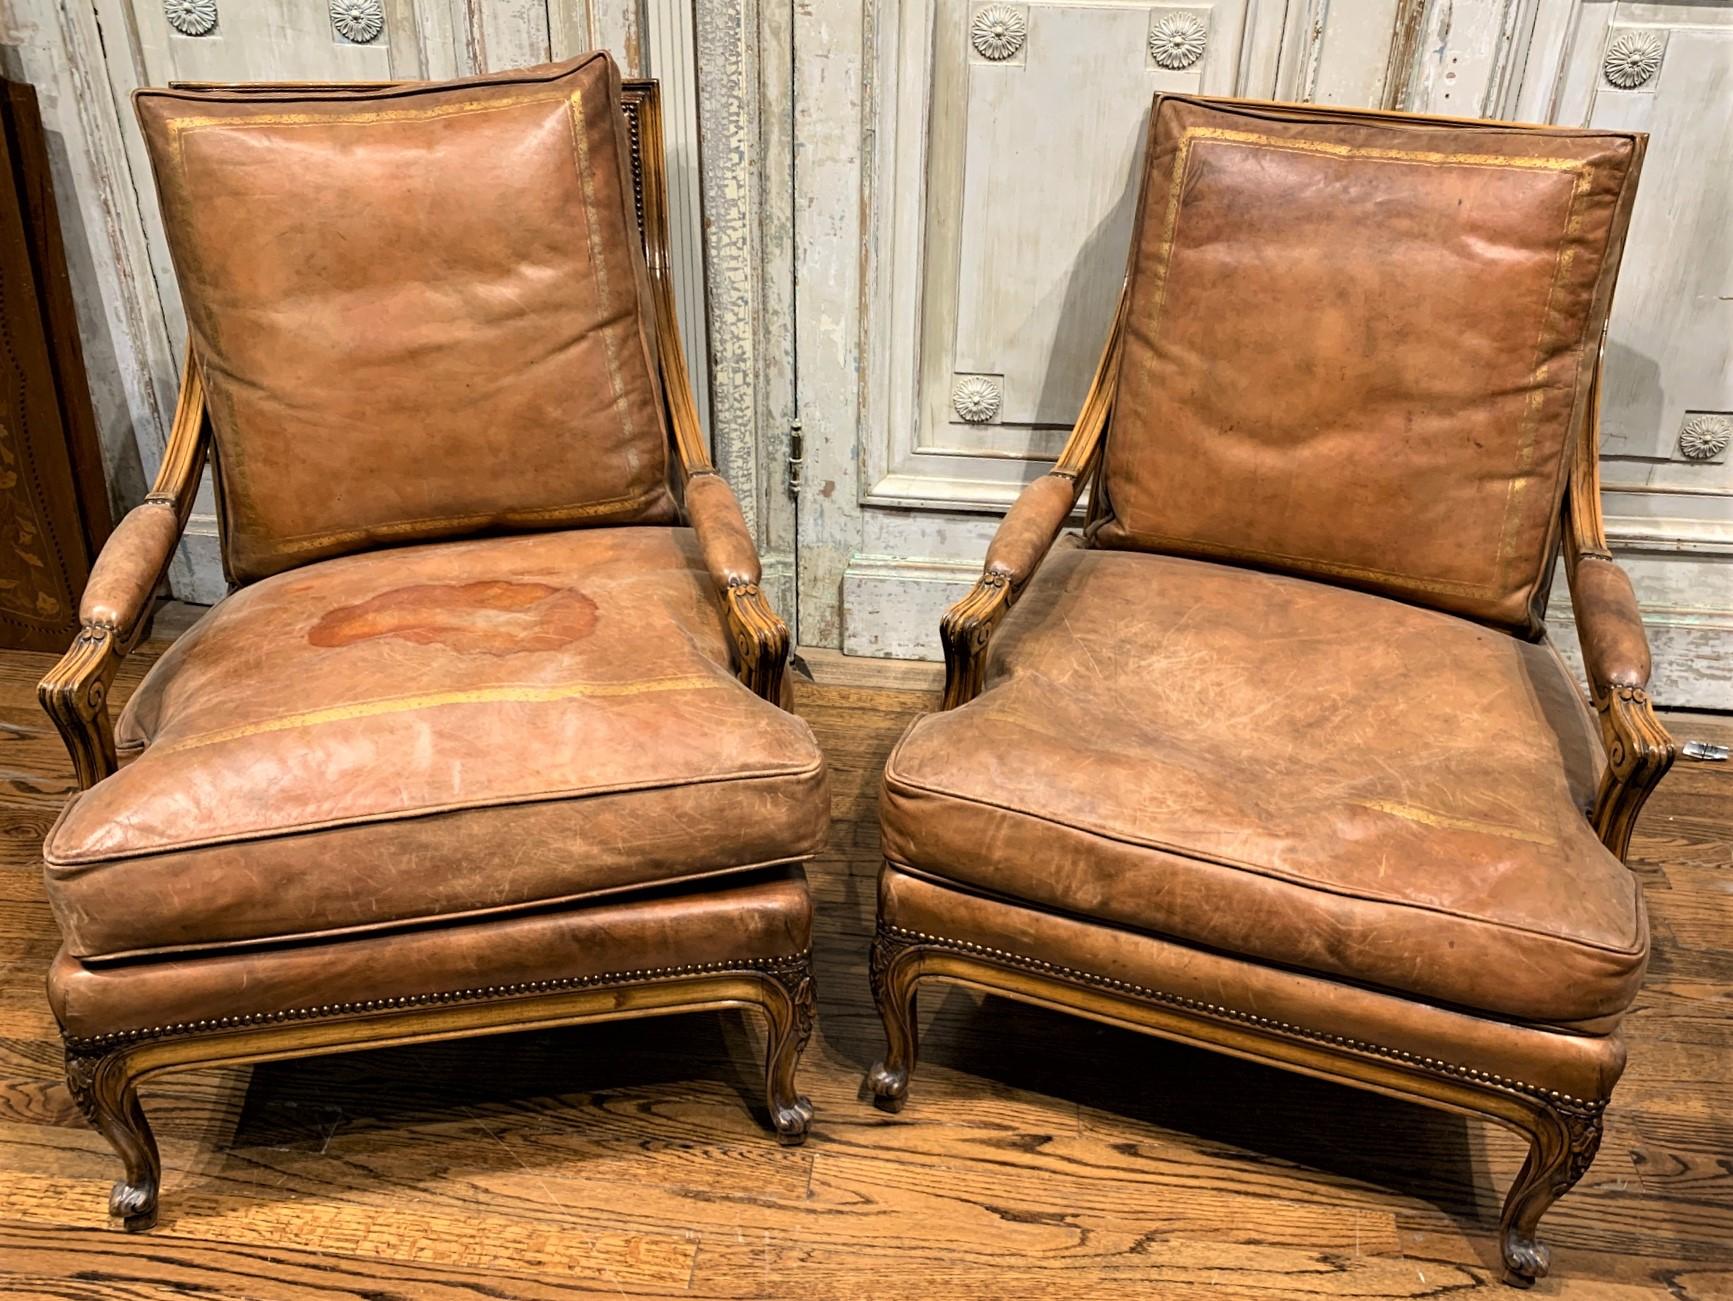 Handsome large scale pair of 19th century French fruitwood and tooled leather fireside chairs featuring nail-head trim, carved knees, and whorl feet;

circa 1890.